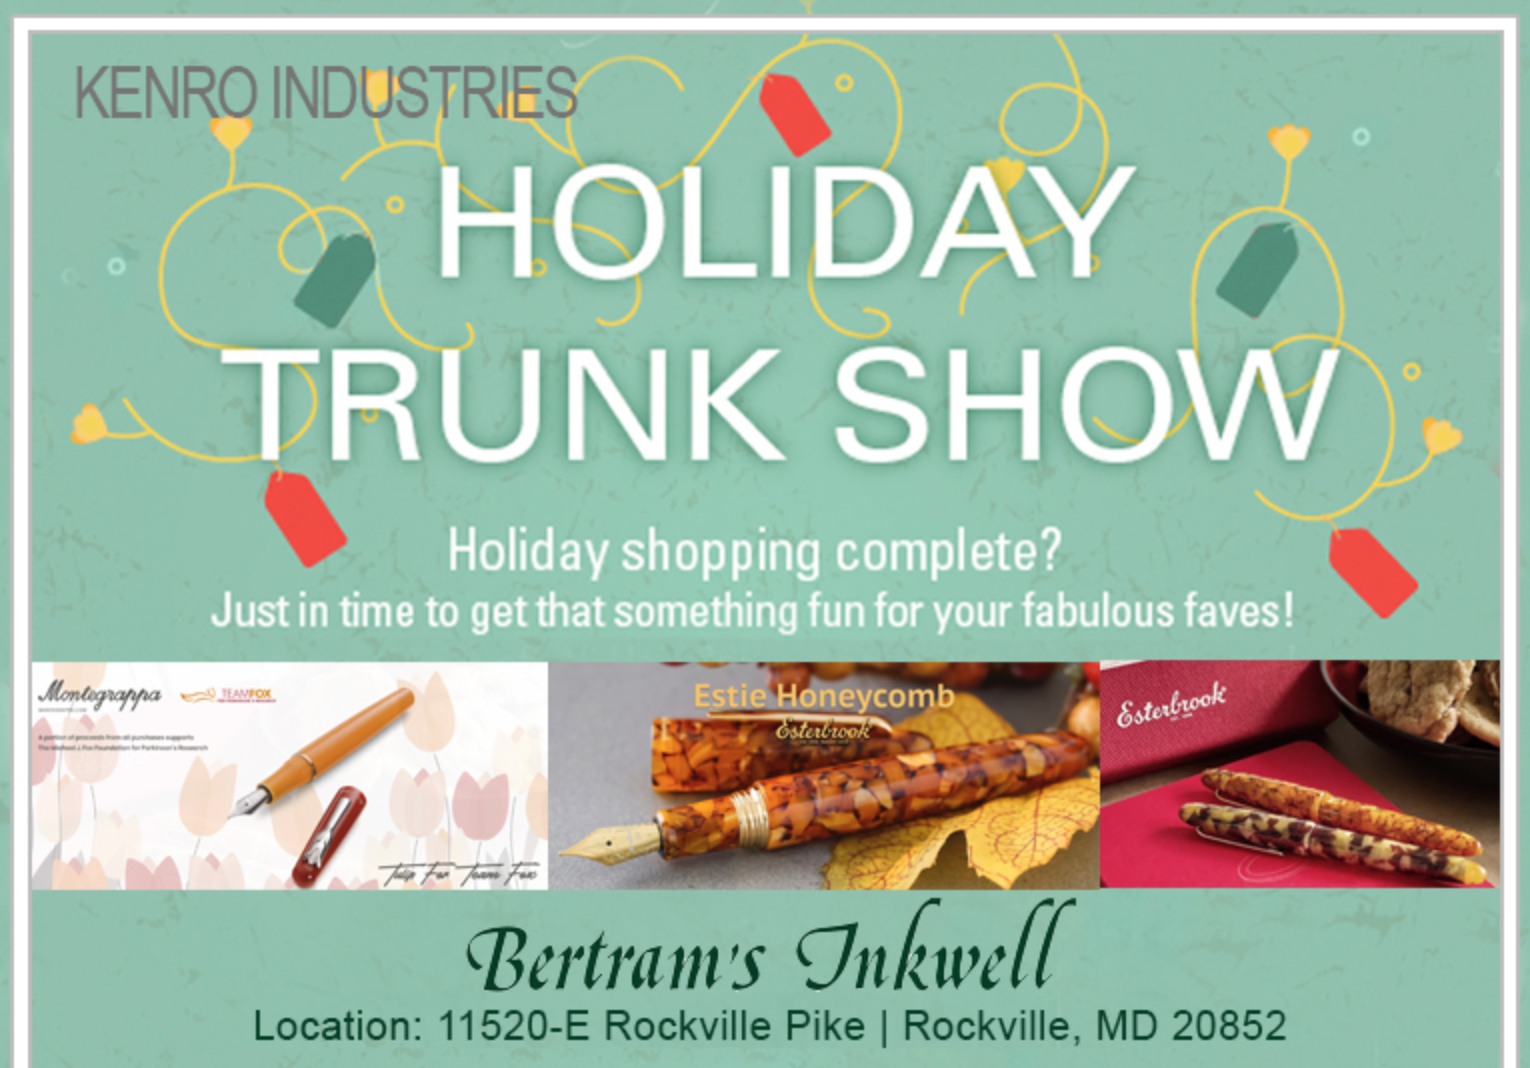 Bertram’s Inkwell Holiday Trunk Show